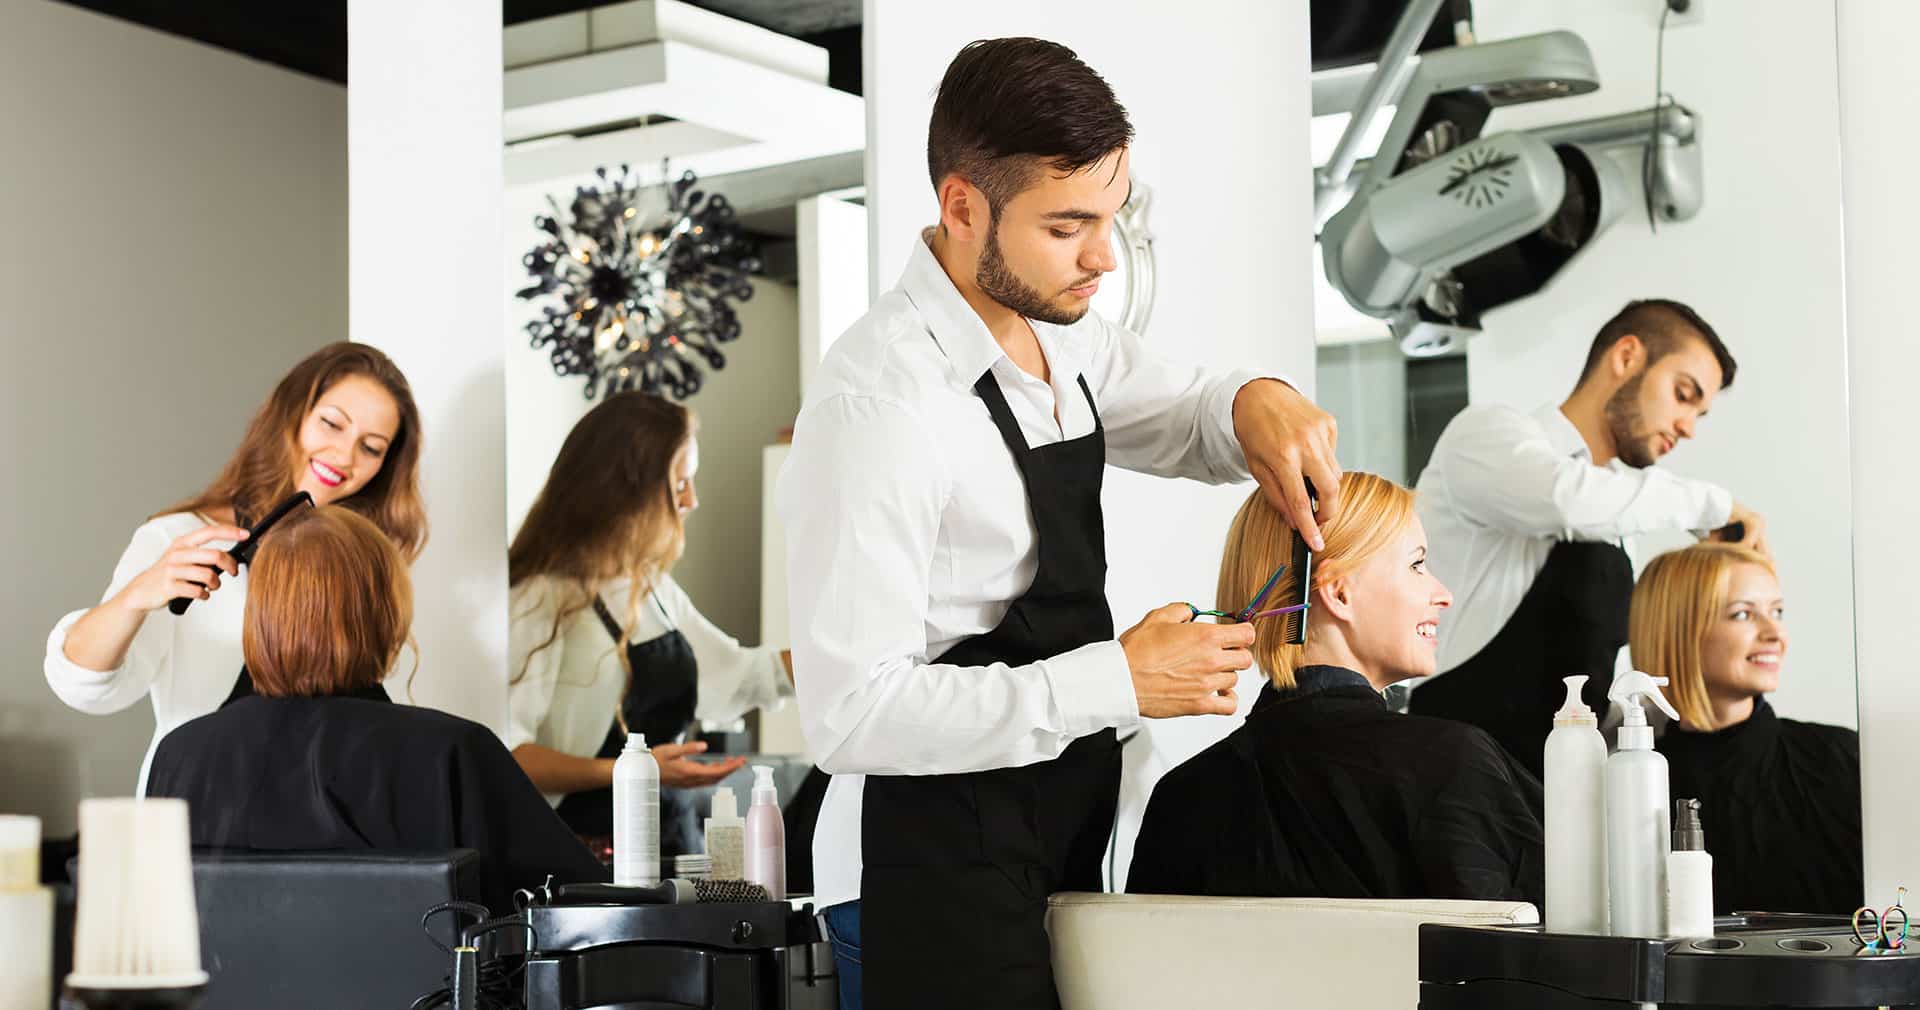 Stylists doing hair at salon stations